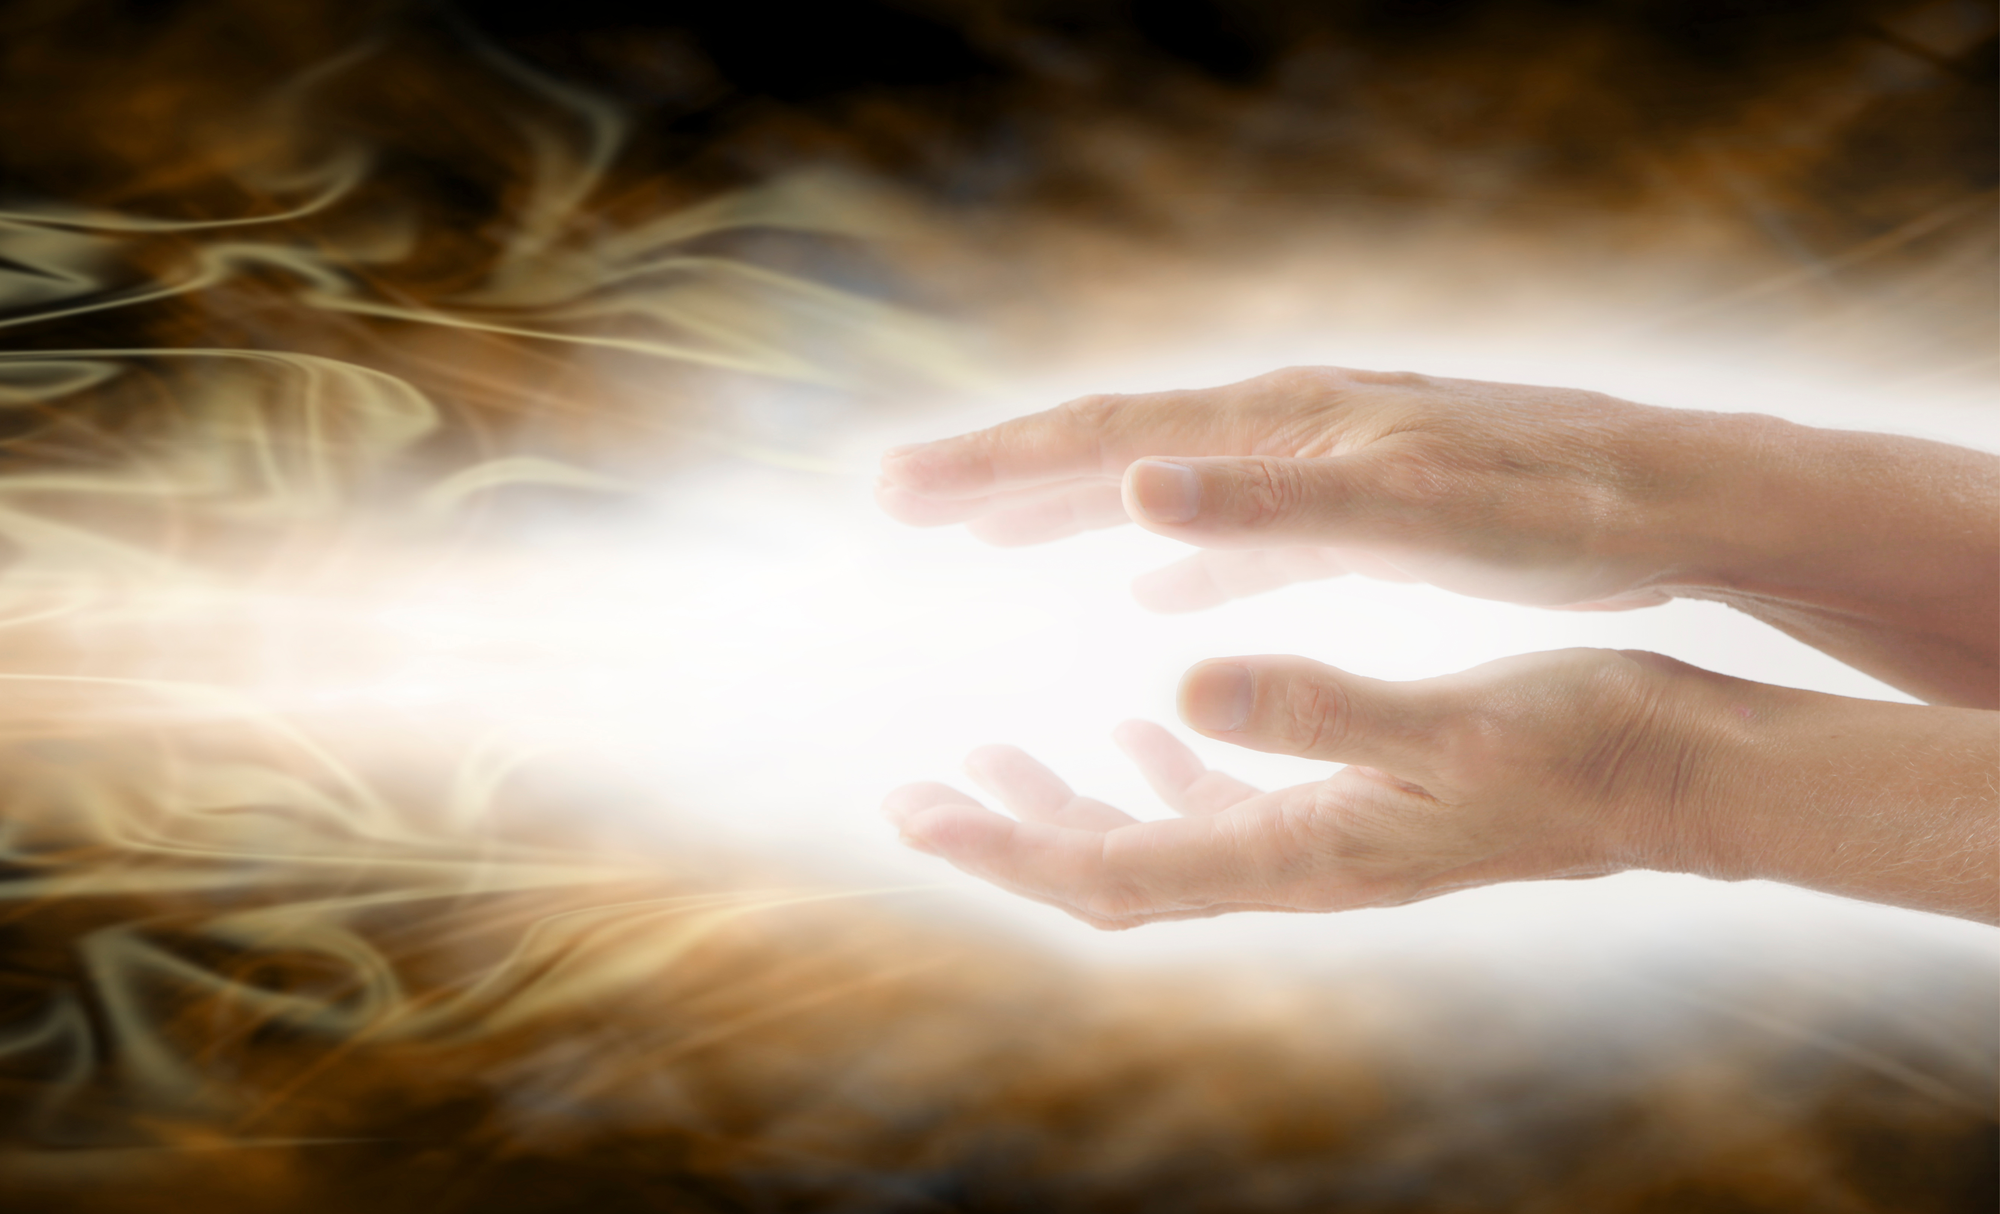 What to expect after a Reiki treatment?